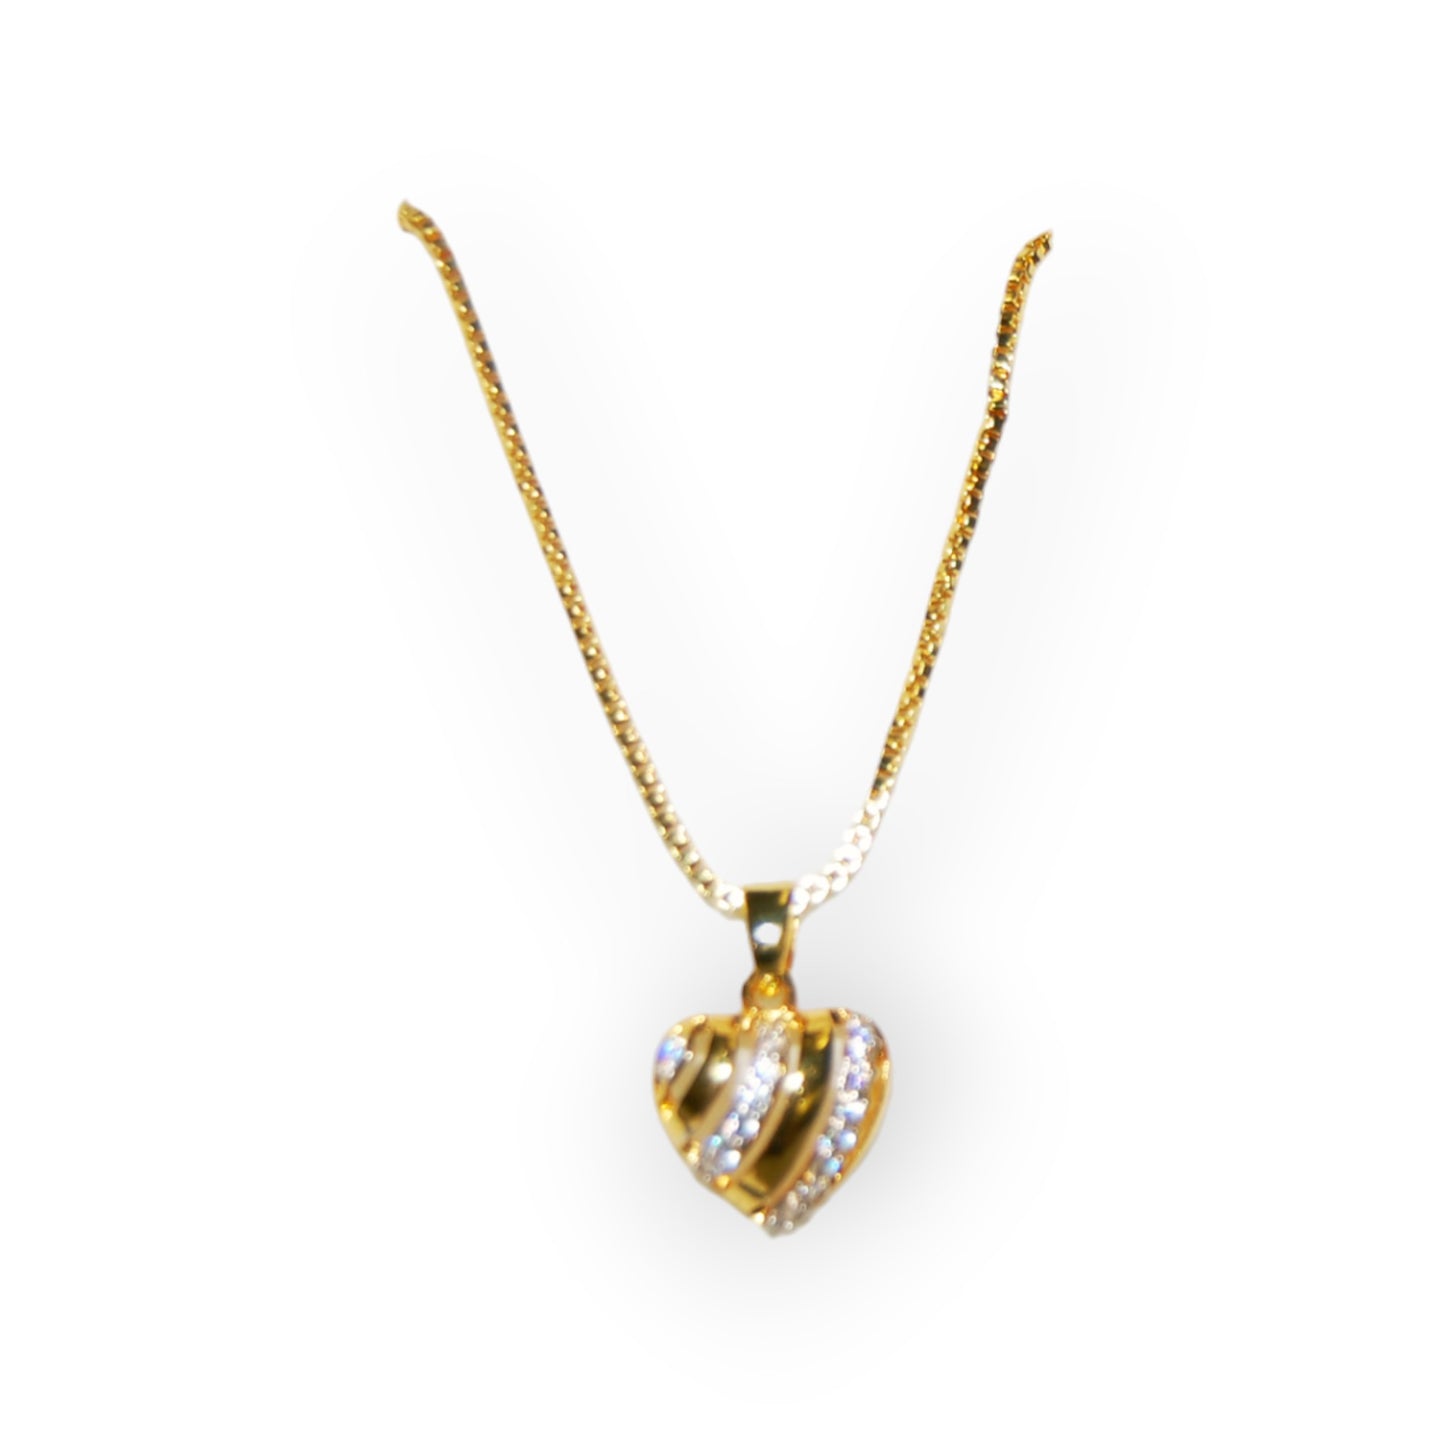 Gold-Plated Necklace and Pendant